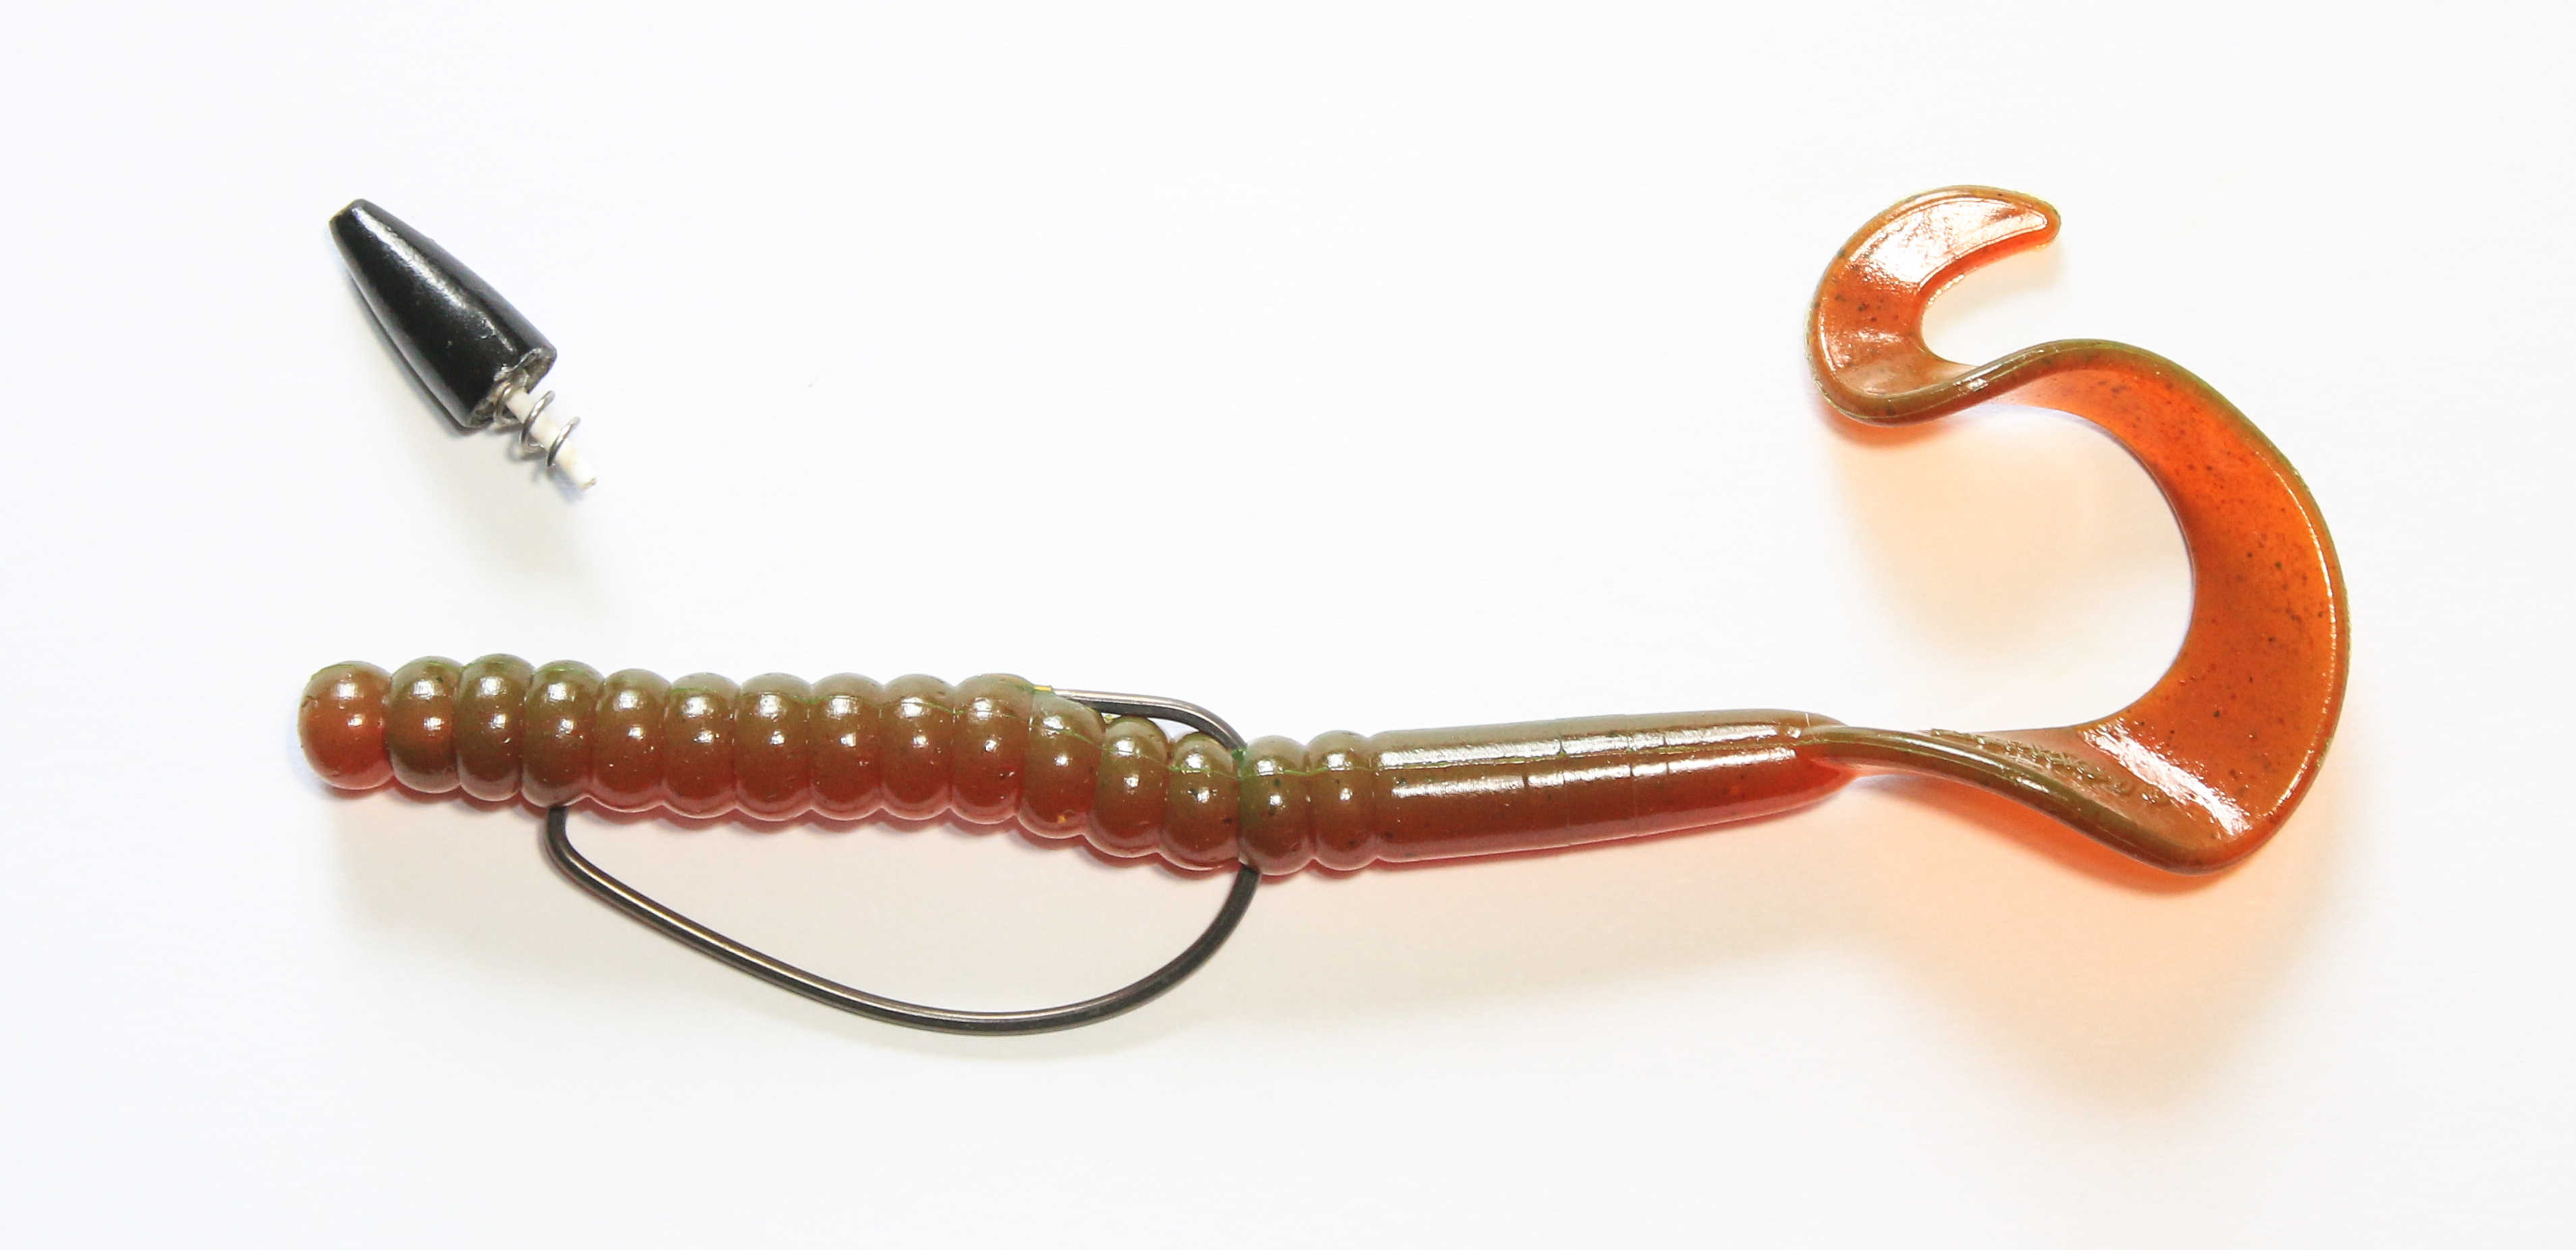 Rig A Worm Weight